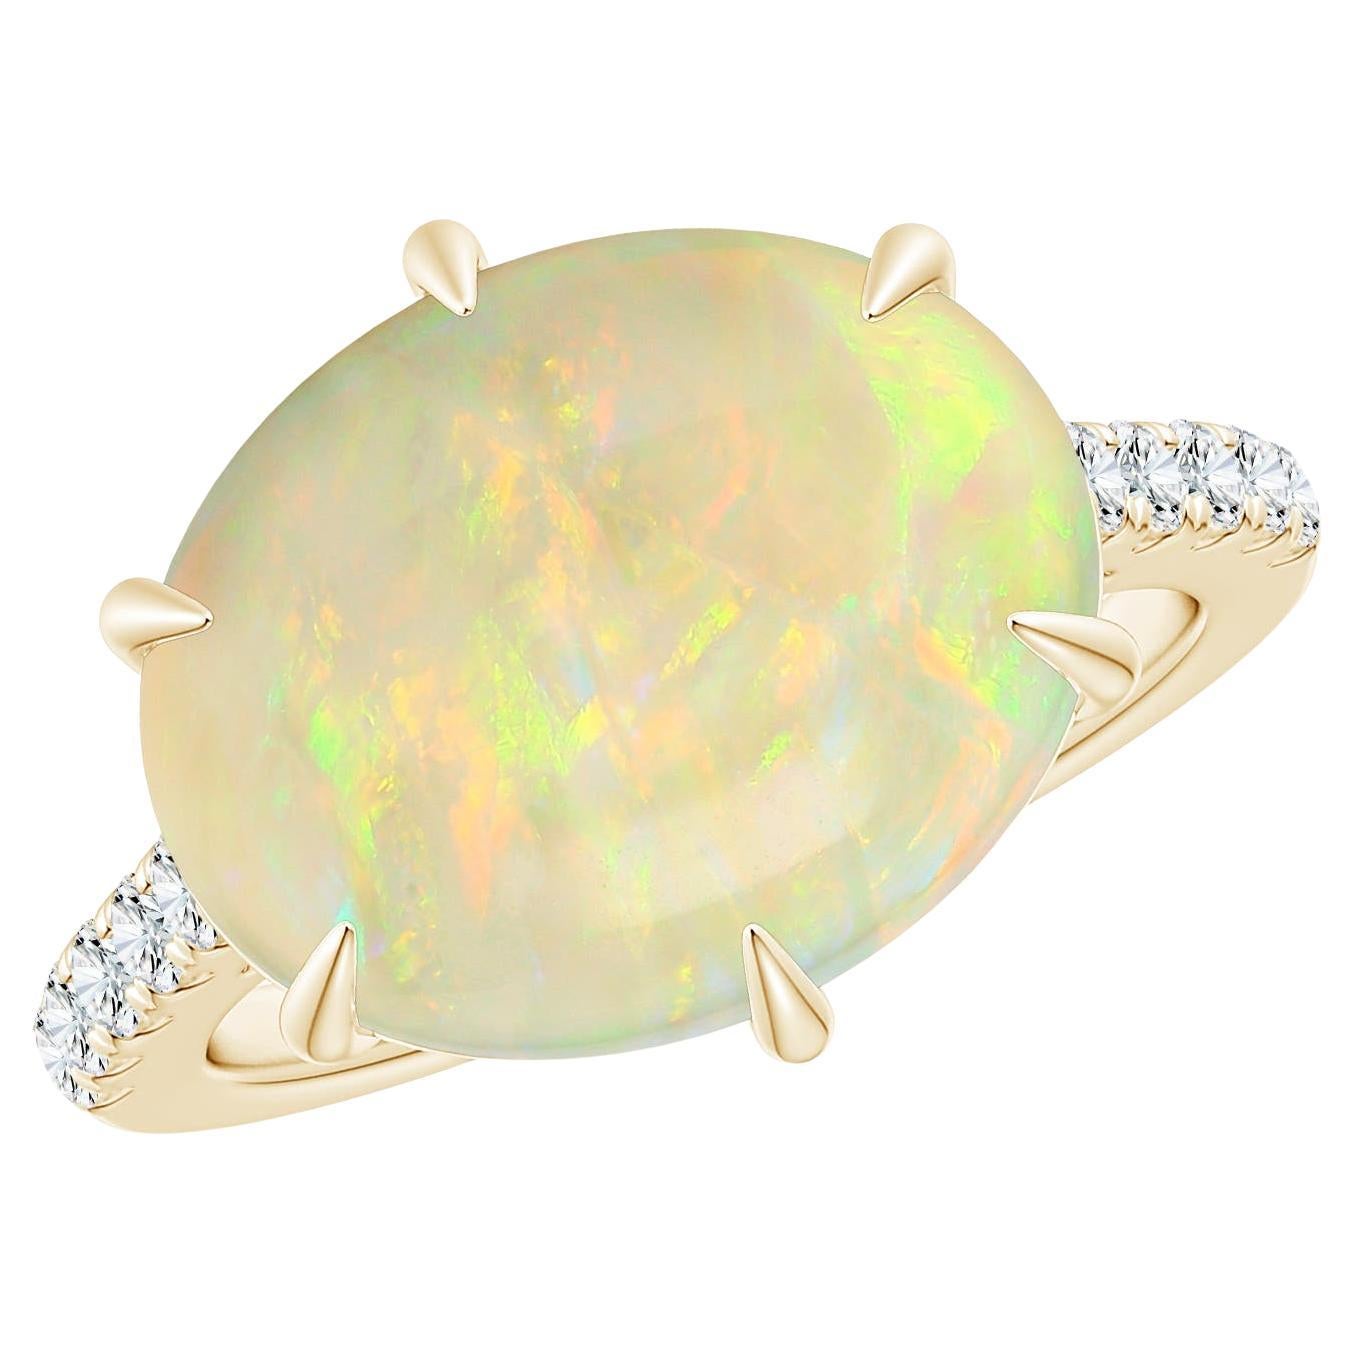 ANGARA GIA Certified Natural Opal Oval East-West Solitaire Ring in Yellow Gold